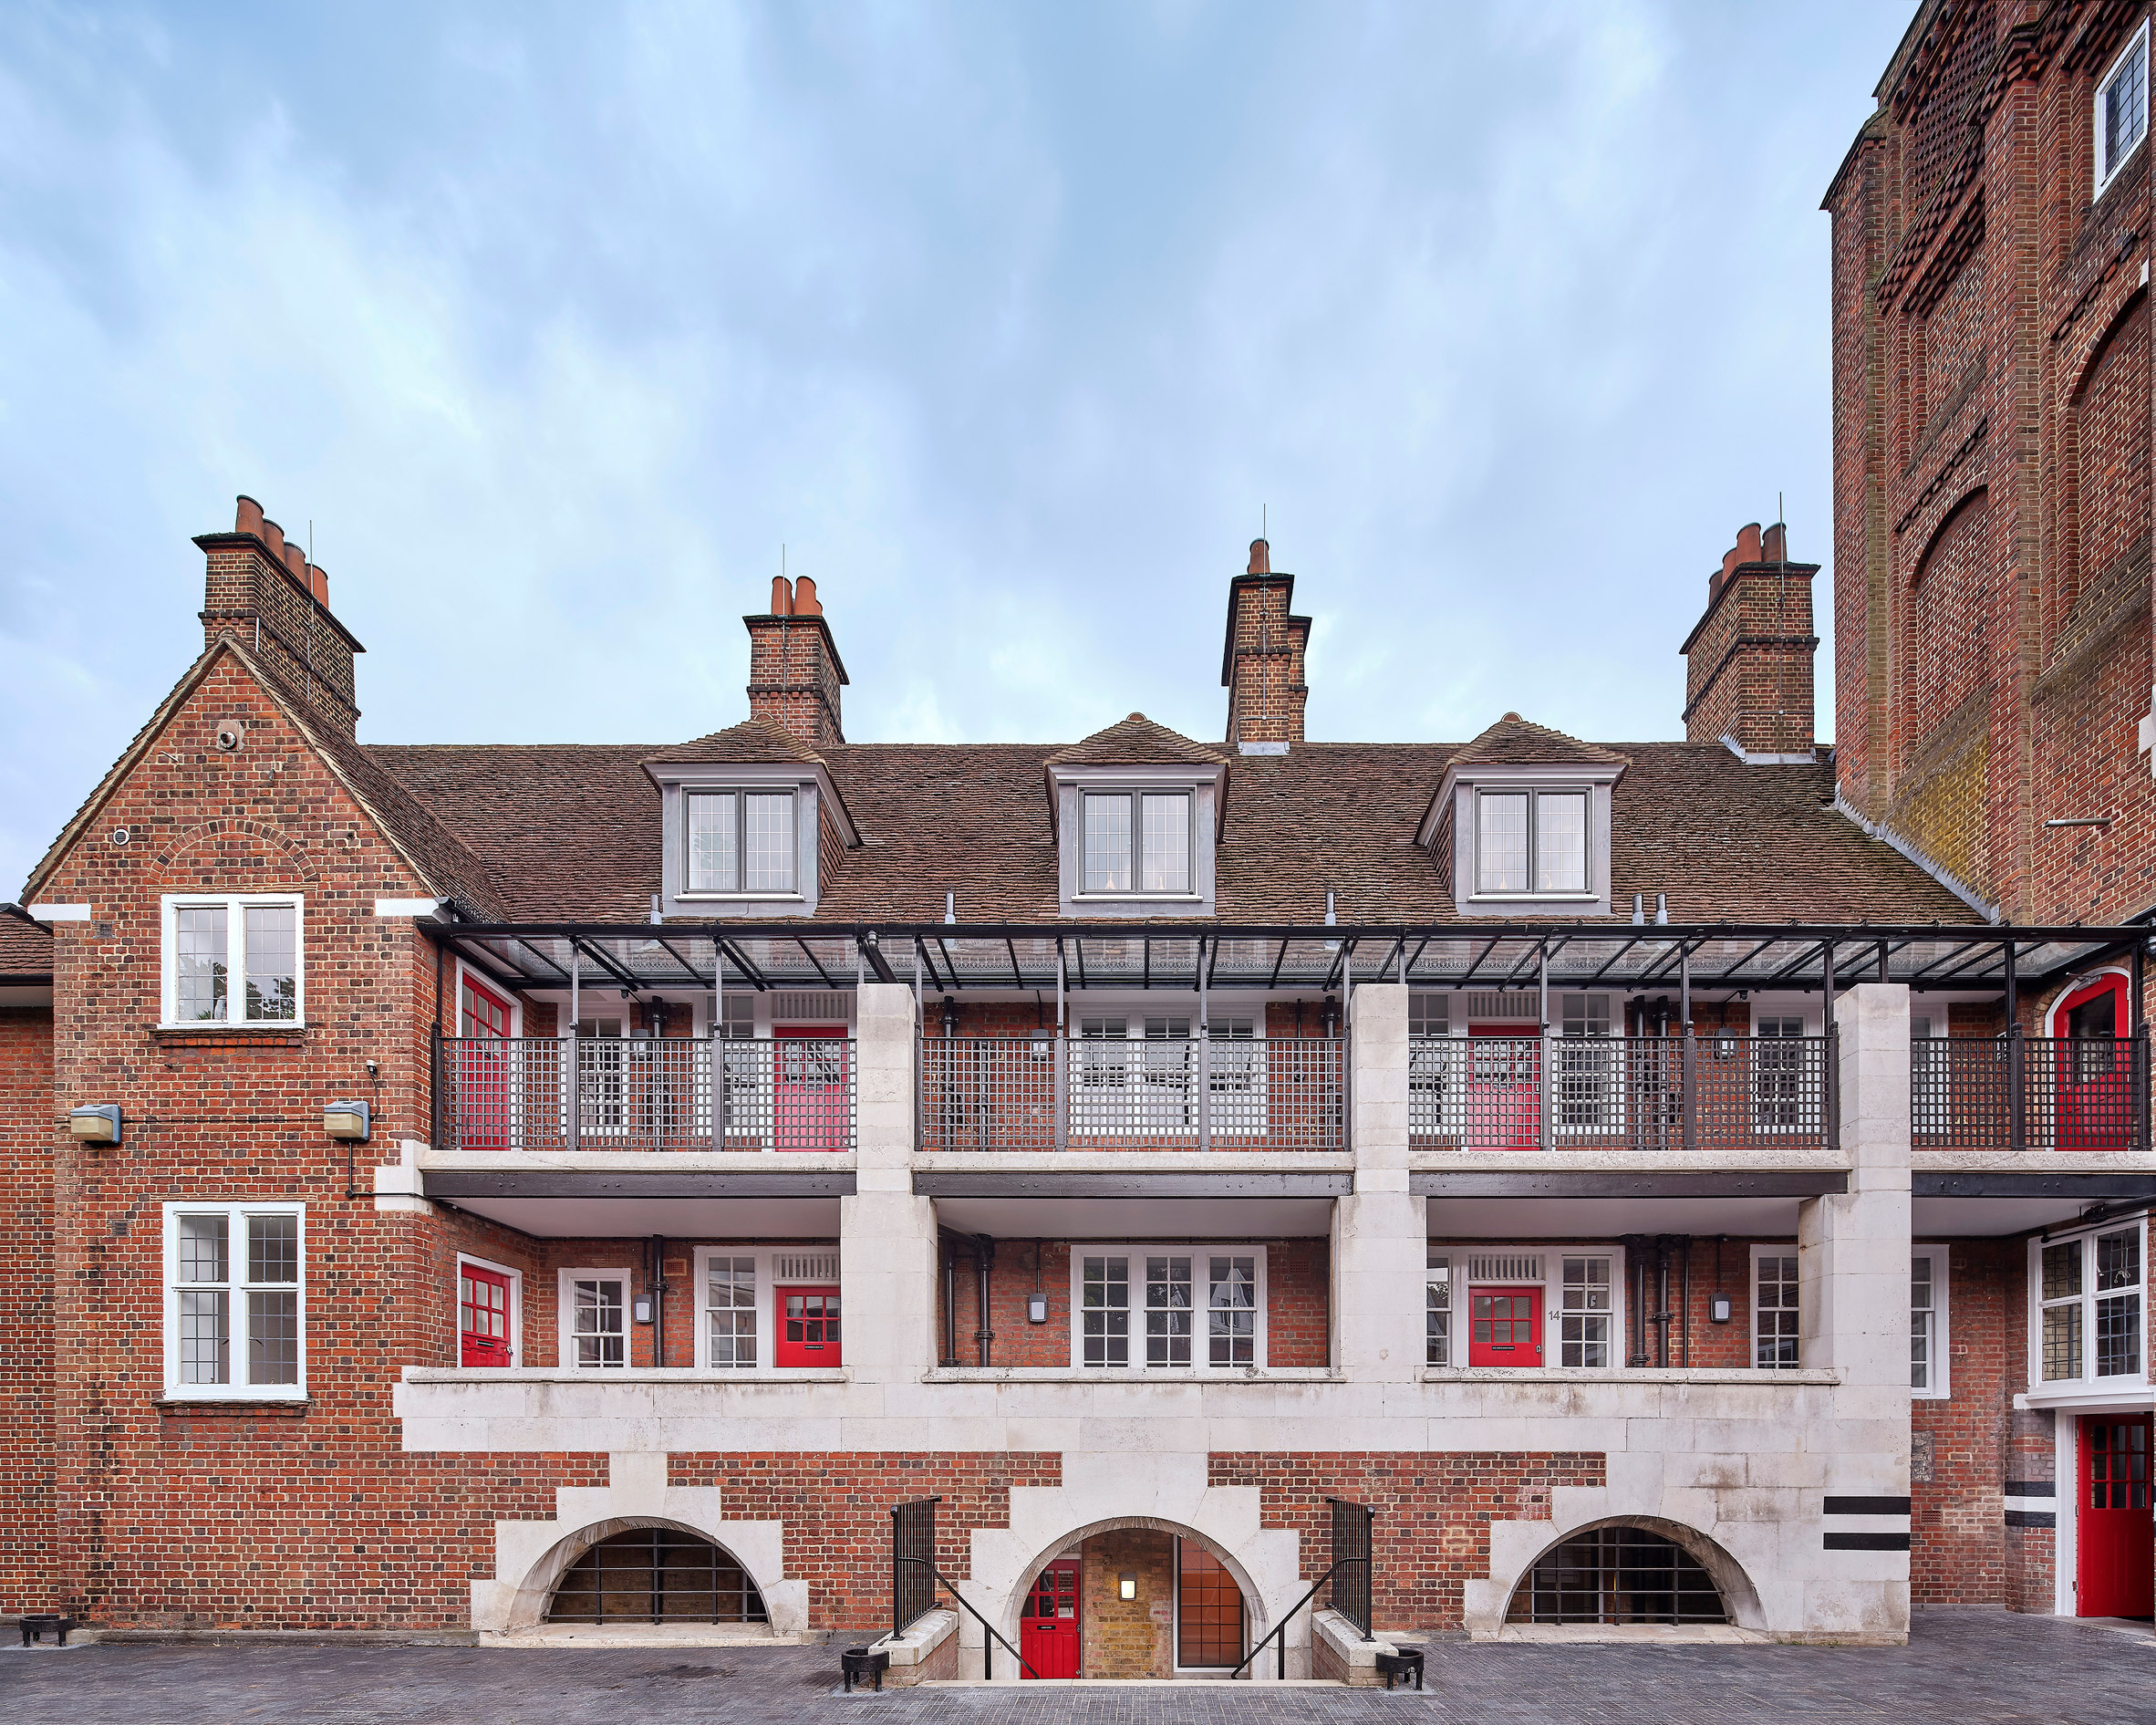 Exterior of Belsize Fire Station apartments by Tate Harmer, London